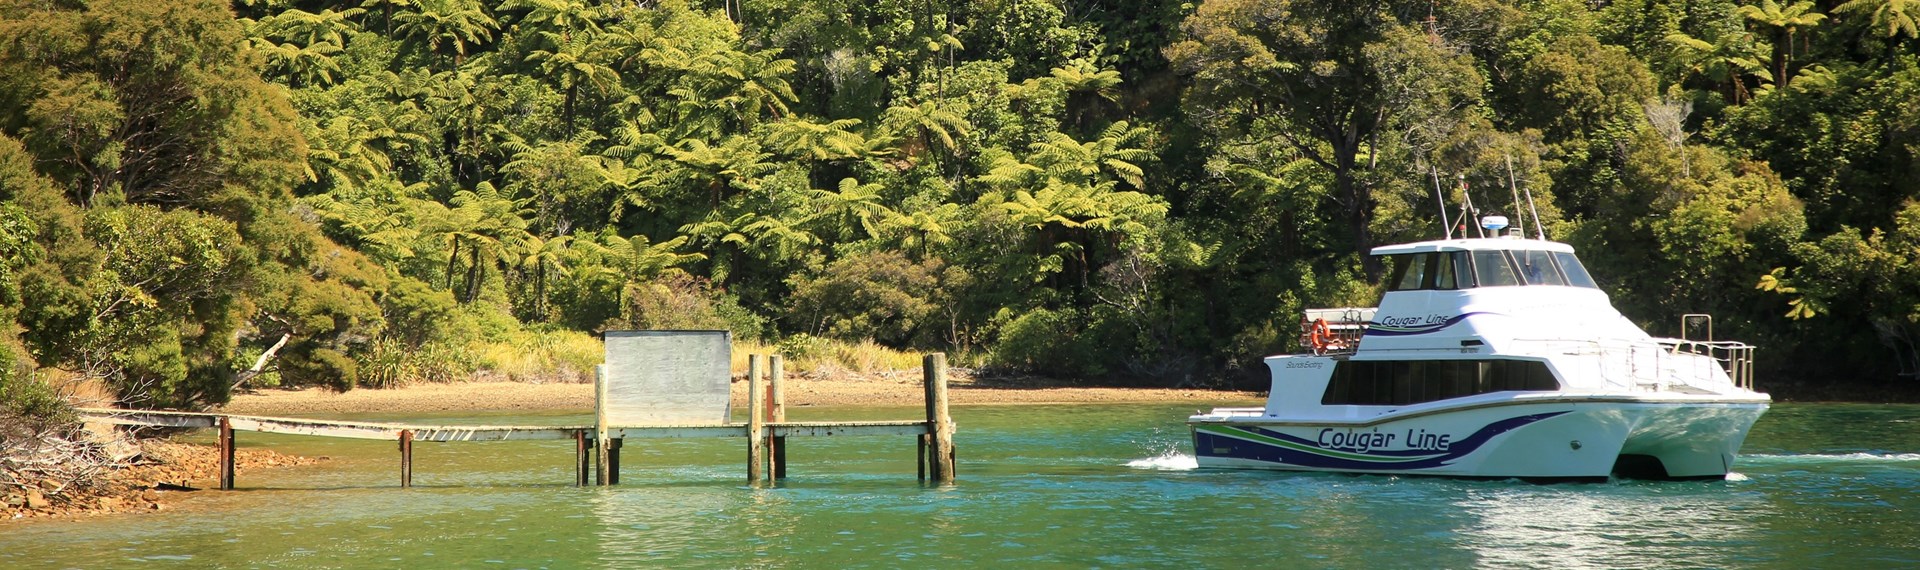 A Cougar Line boat at the Camp Bay jetty in a tranquil bay of calm green water, fern-filled native bush and a golden beach in the Marlborough Sounds, New Zealand